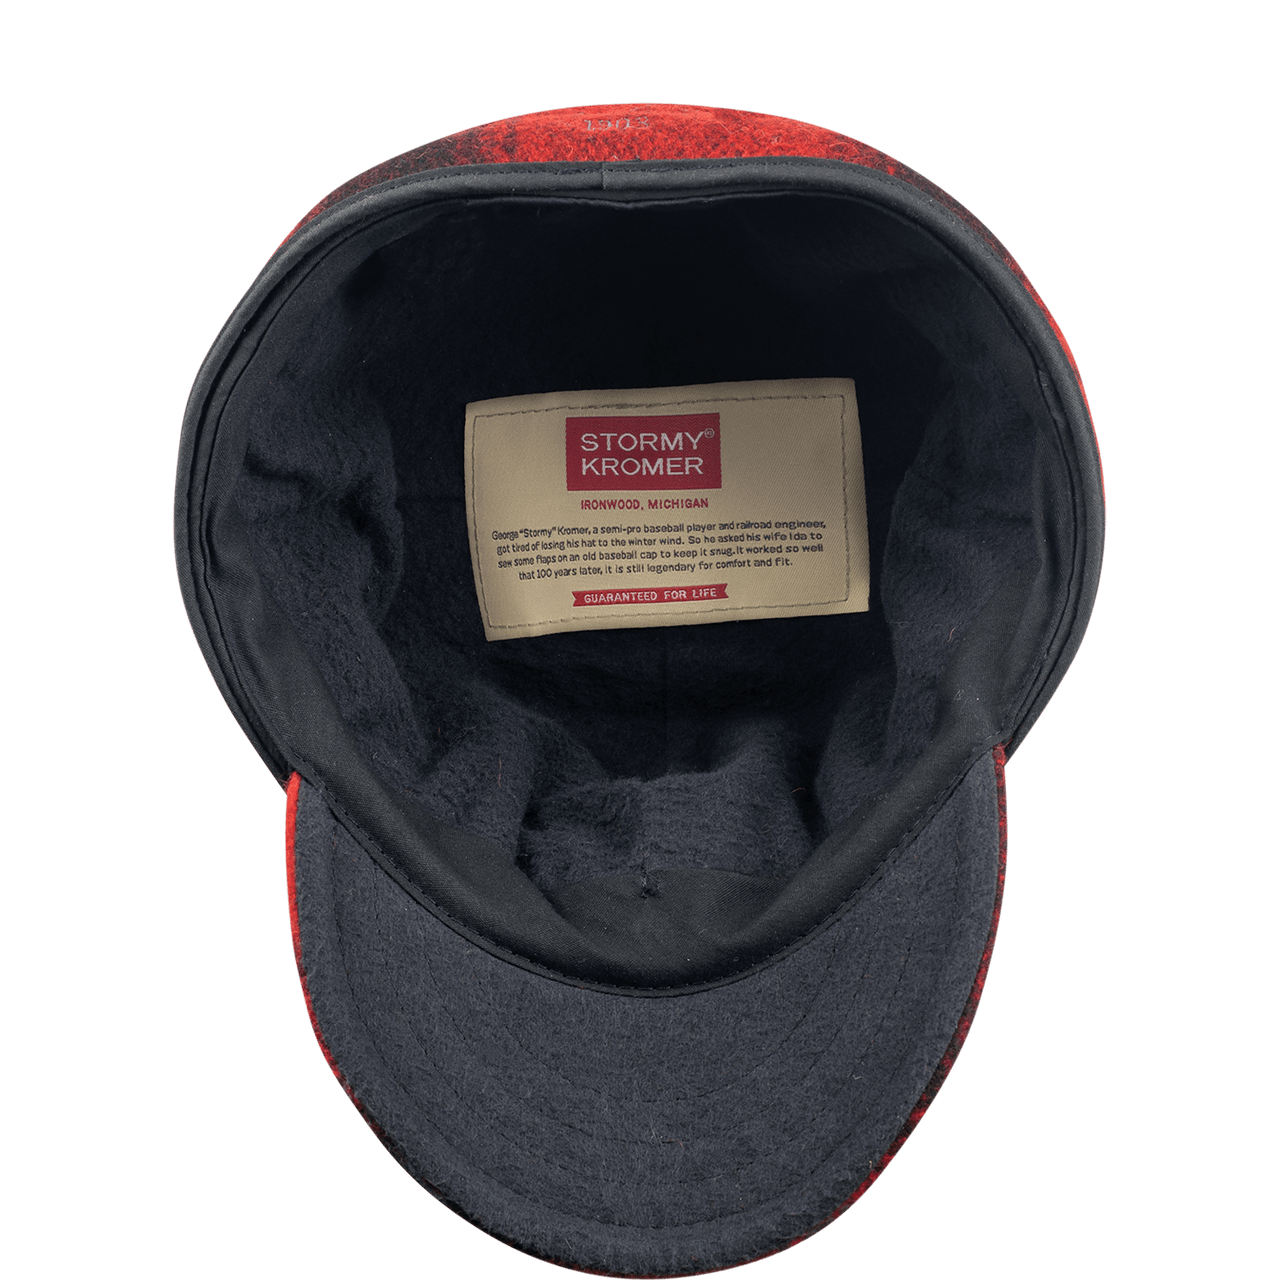 Interior View of Stormy Kromer Original Red and black plaid wool hat